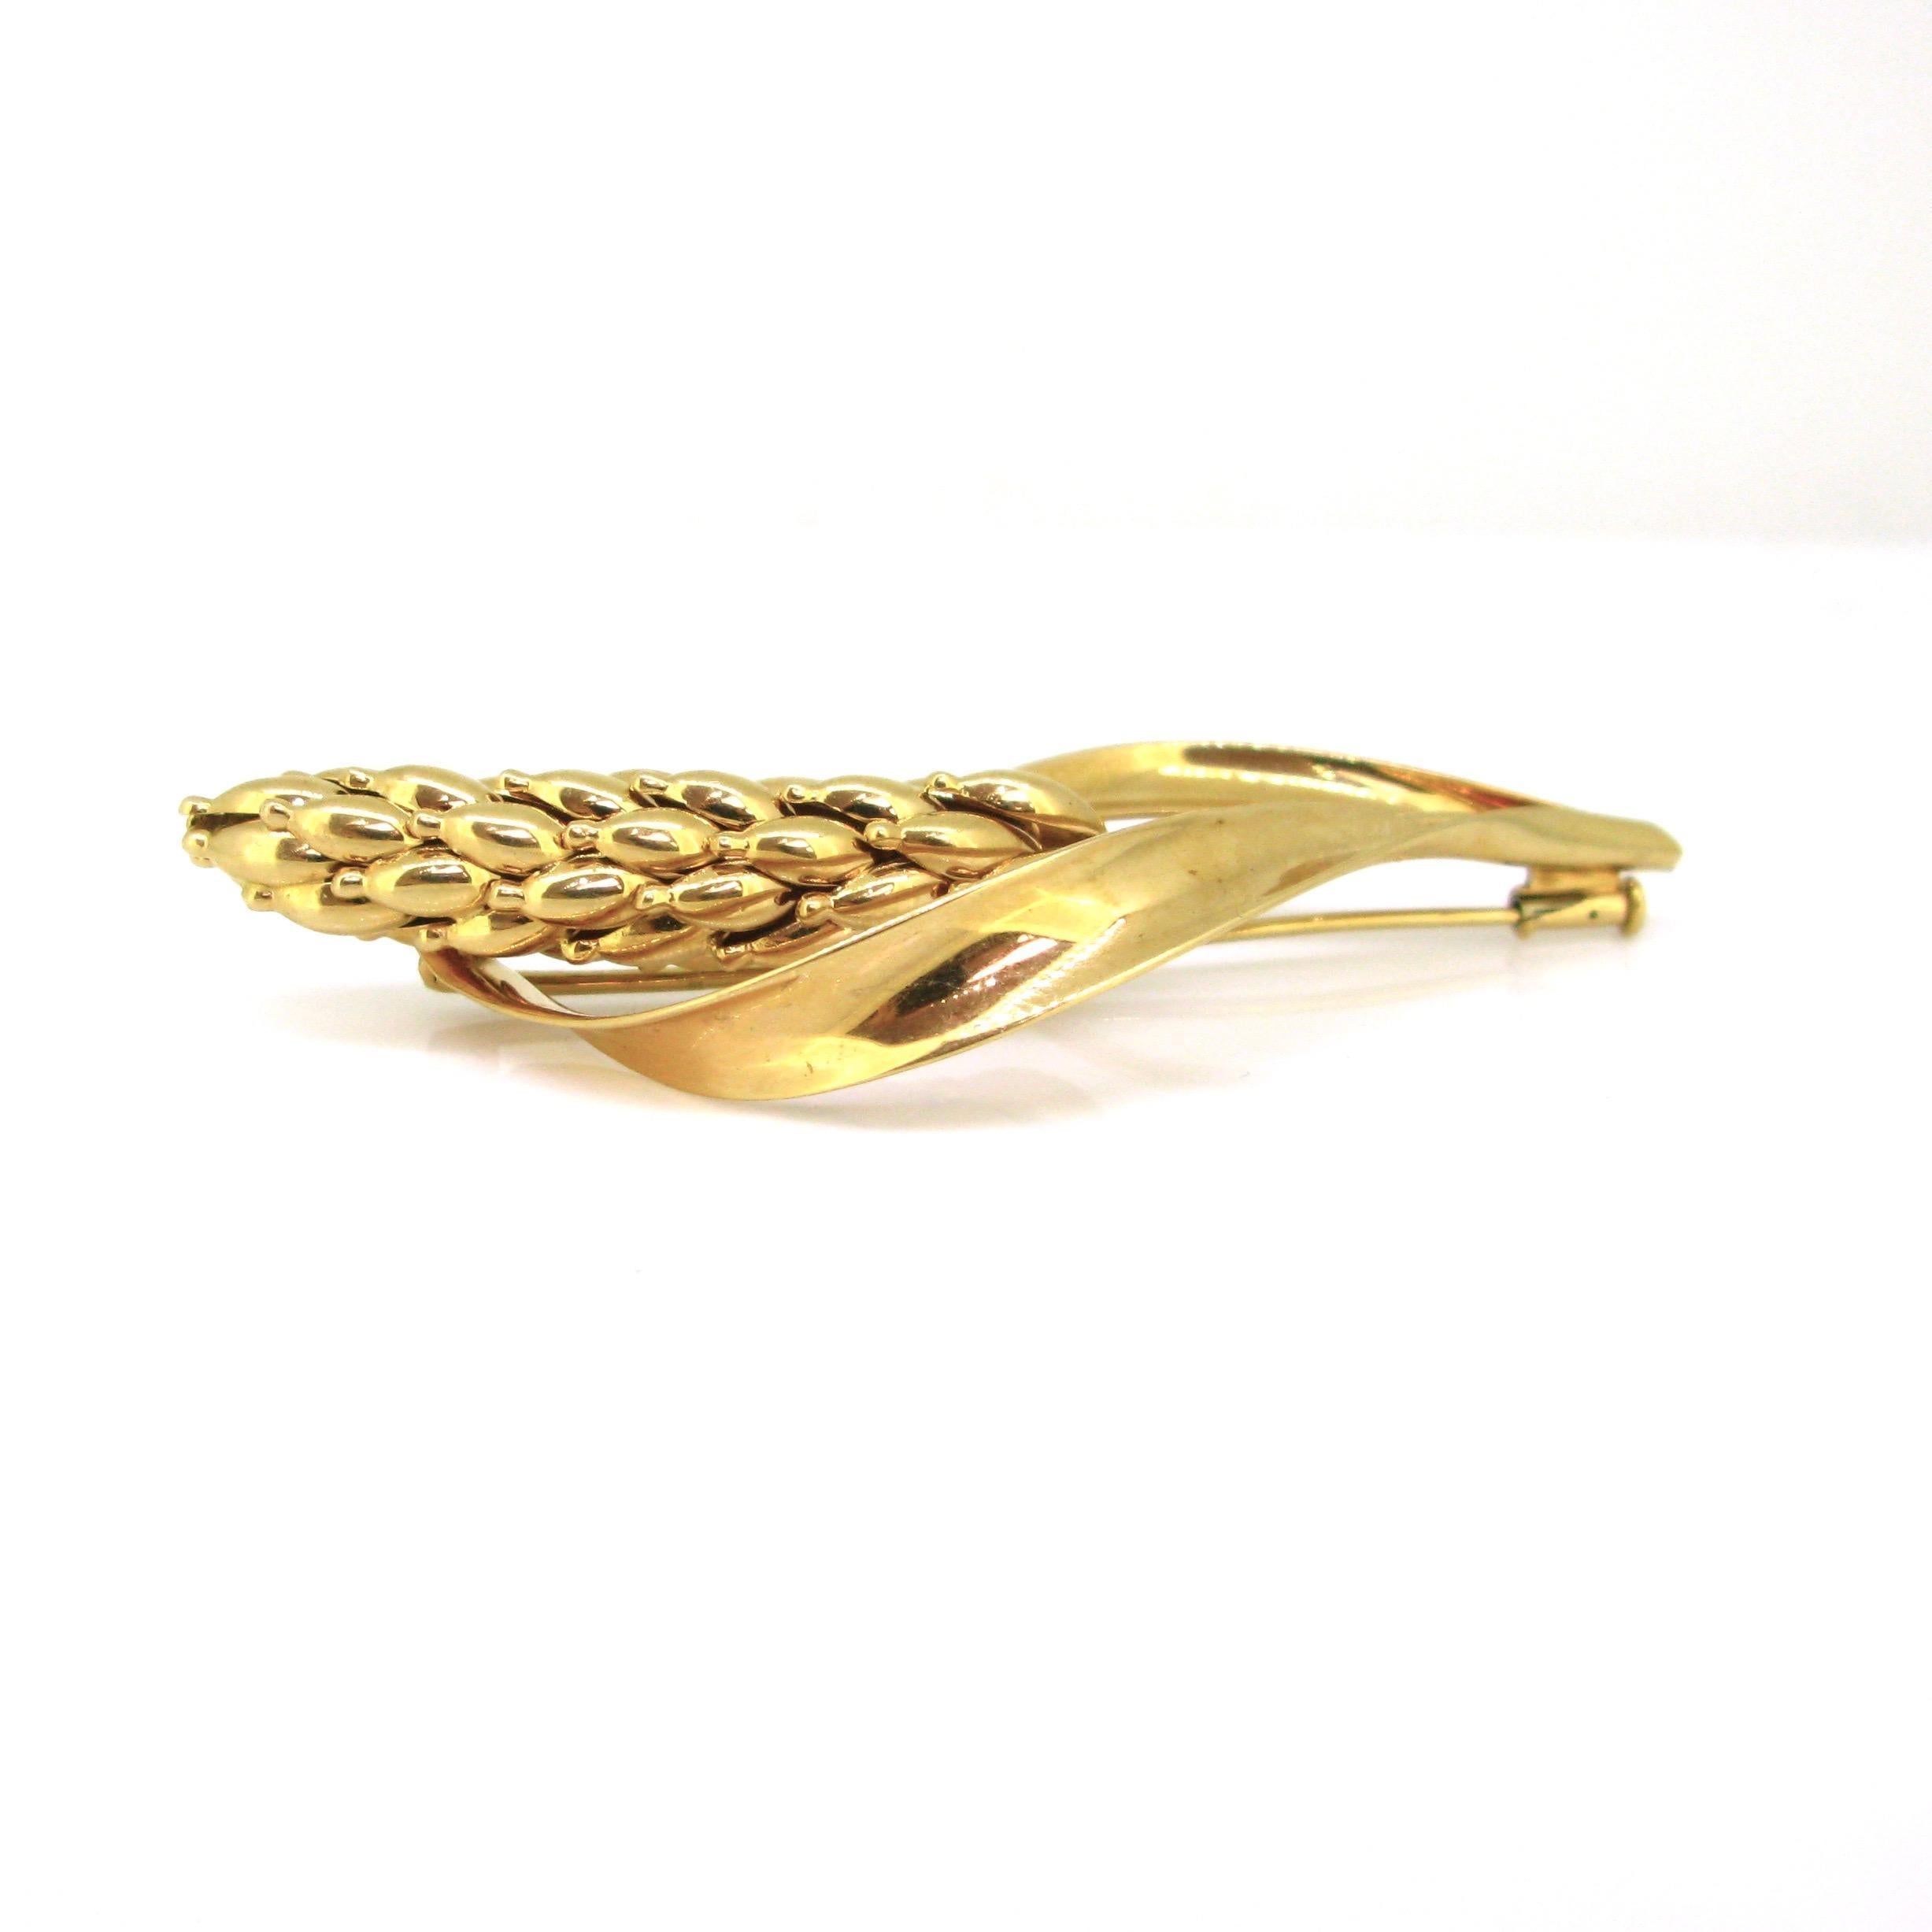 Women's or Men's Retro Sheaf of Wheat Pin Brooch by Bettetini, 18kt Yellow Gold, France, circa 19